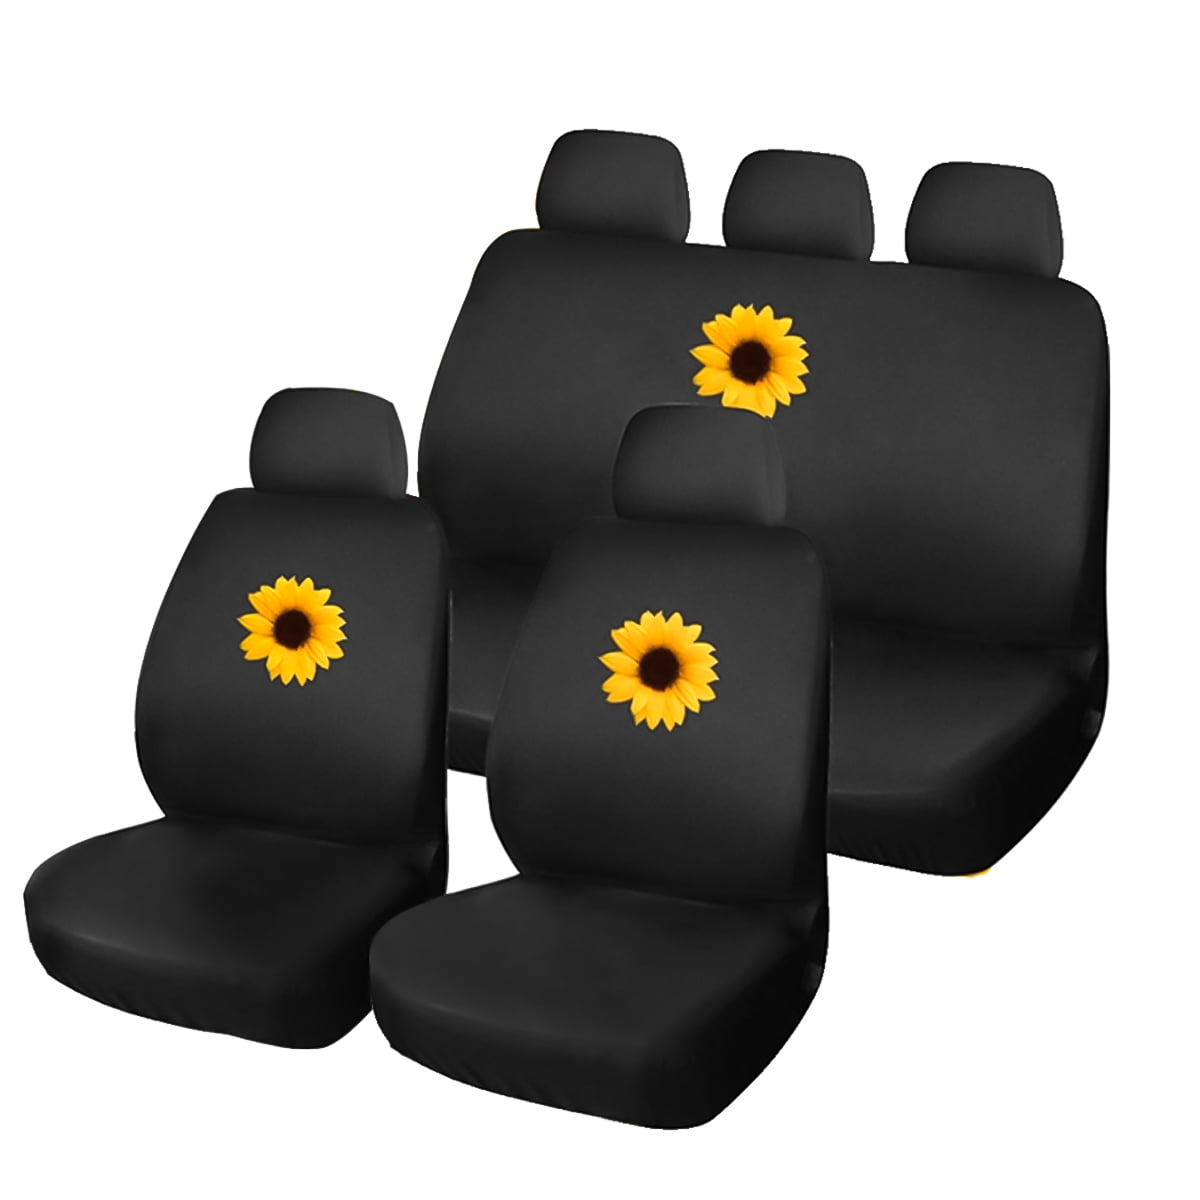 Britimes Sunflower Set of 2 Car Seat Covers for Women and Men Sunflower Print Auto Accessories Carseat Front Seats Fit for Cars,SUV Sedan,Truck 